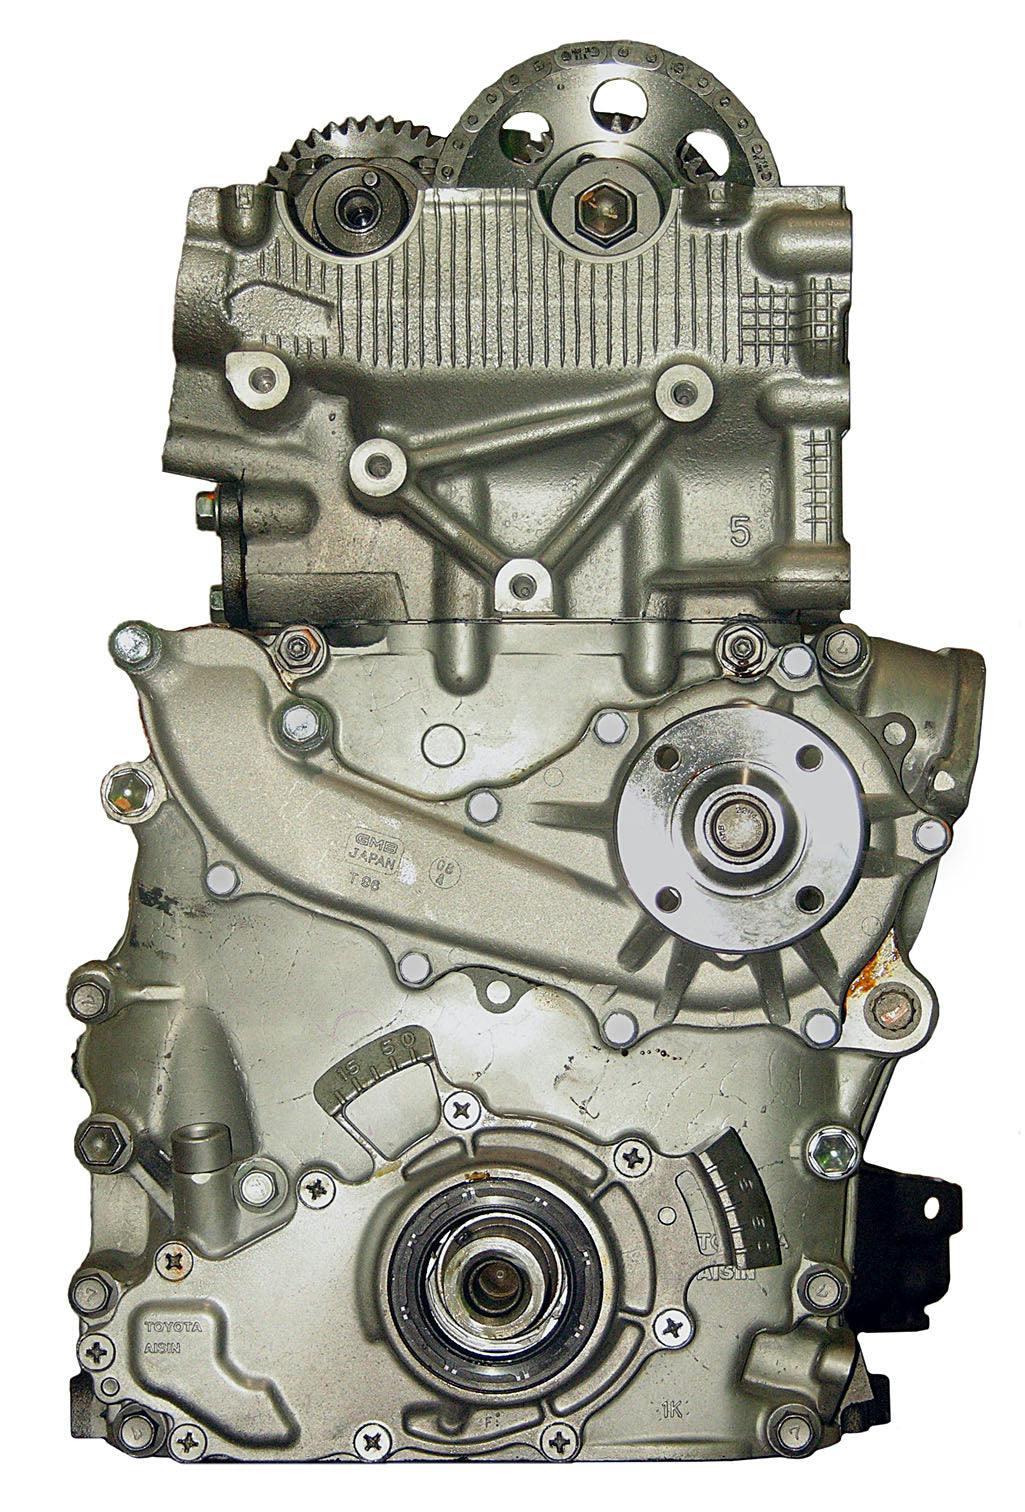 2.4L Inline-4 Engine for 1998-2000 Toyota Tacoma RWD